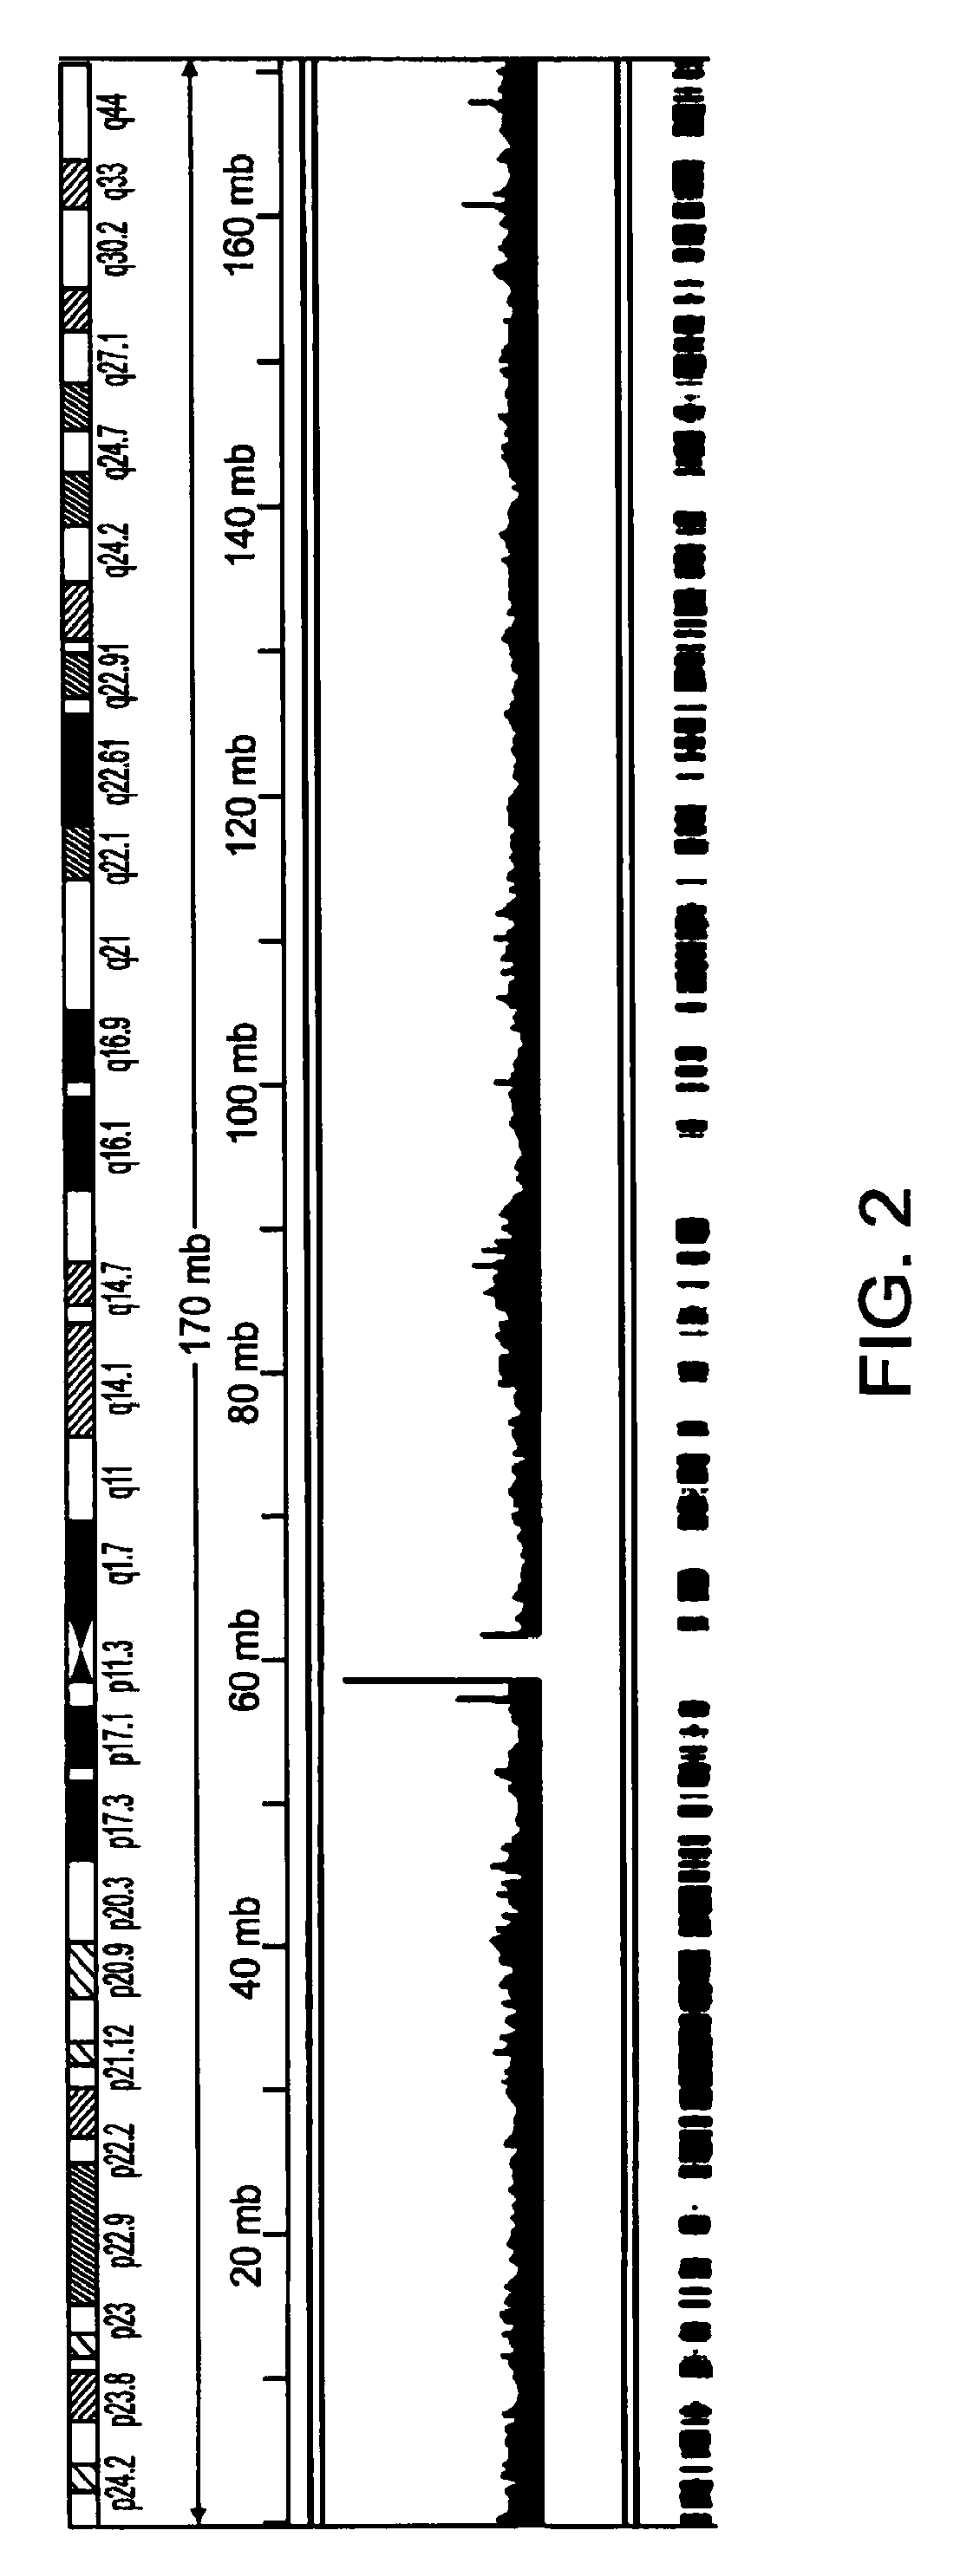 Methods of amplifying whole genome of a single cell